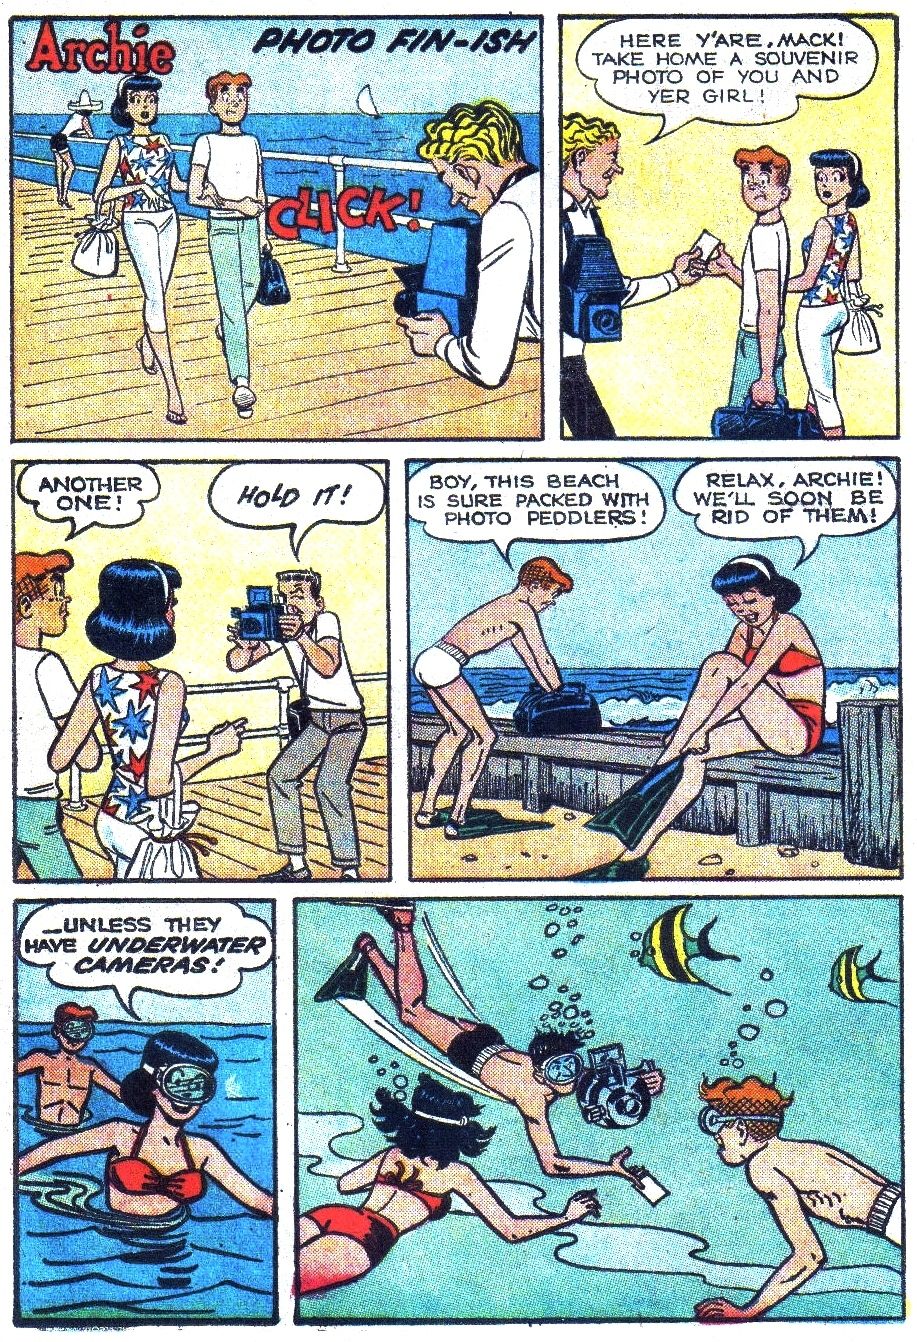 Archie (1960) 139 Page 11